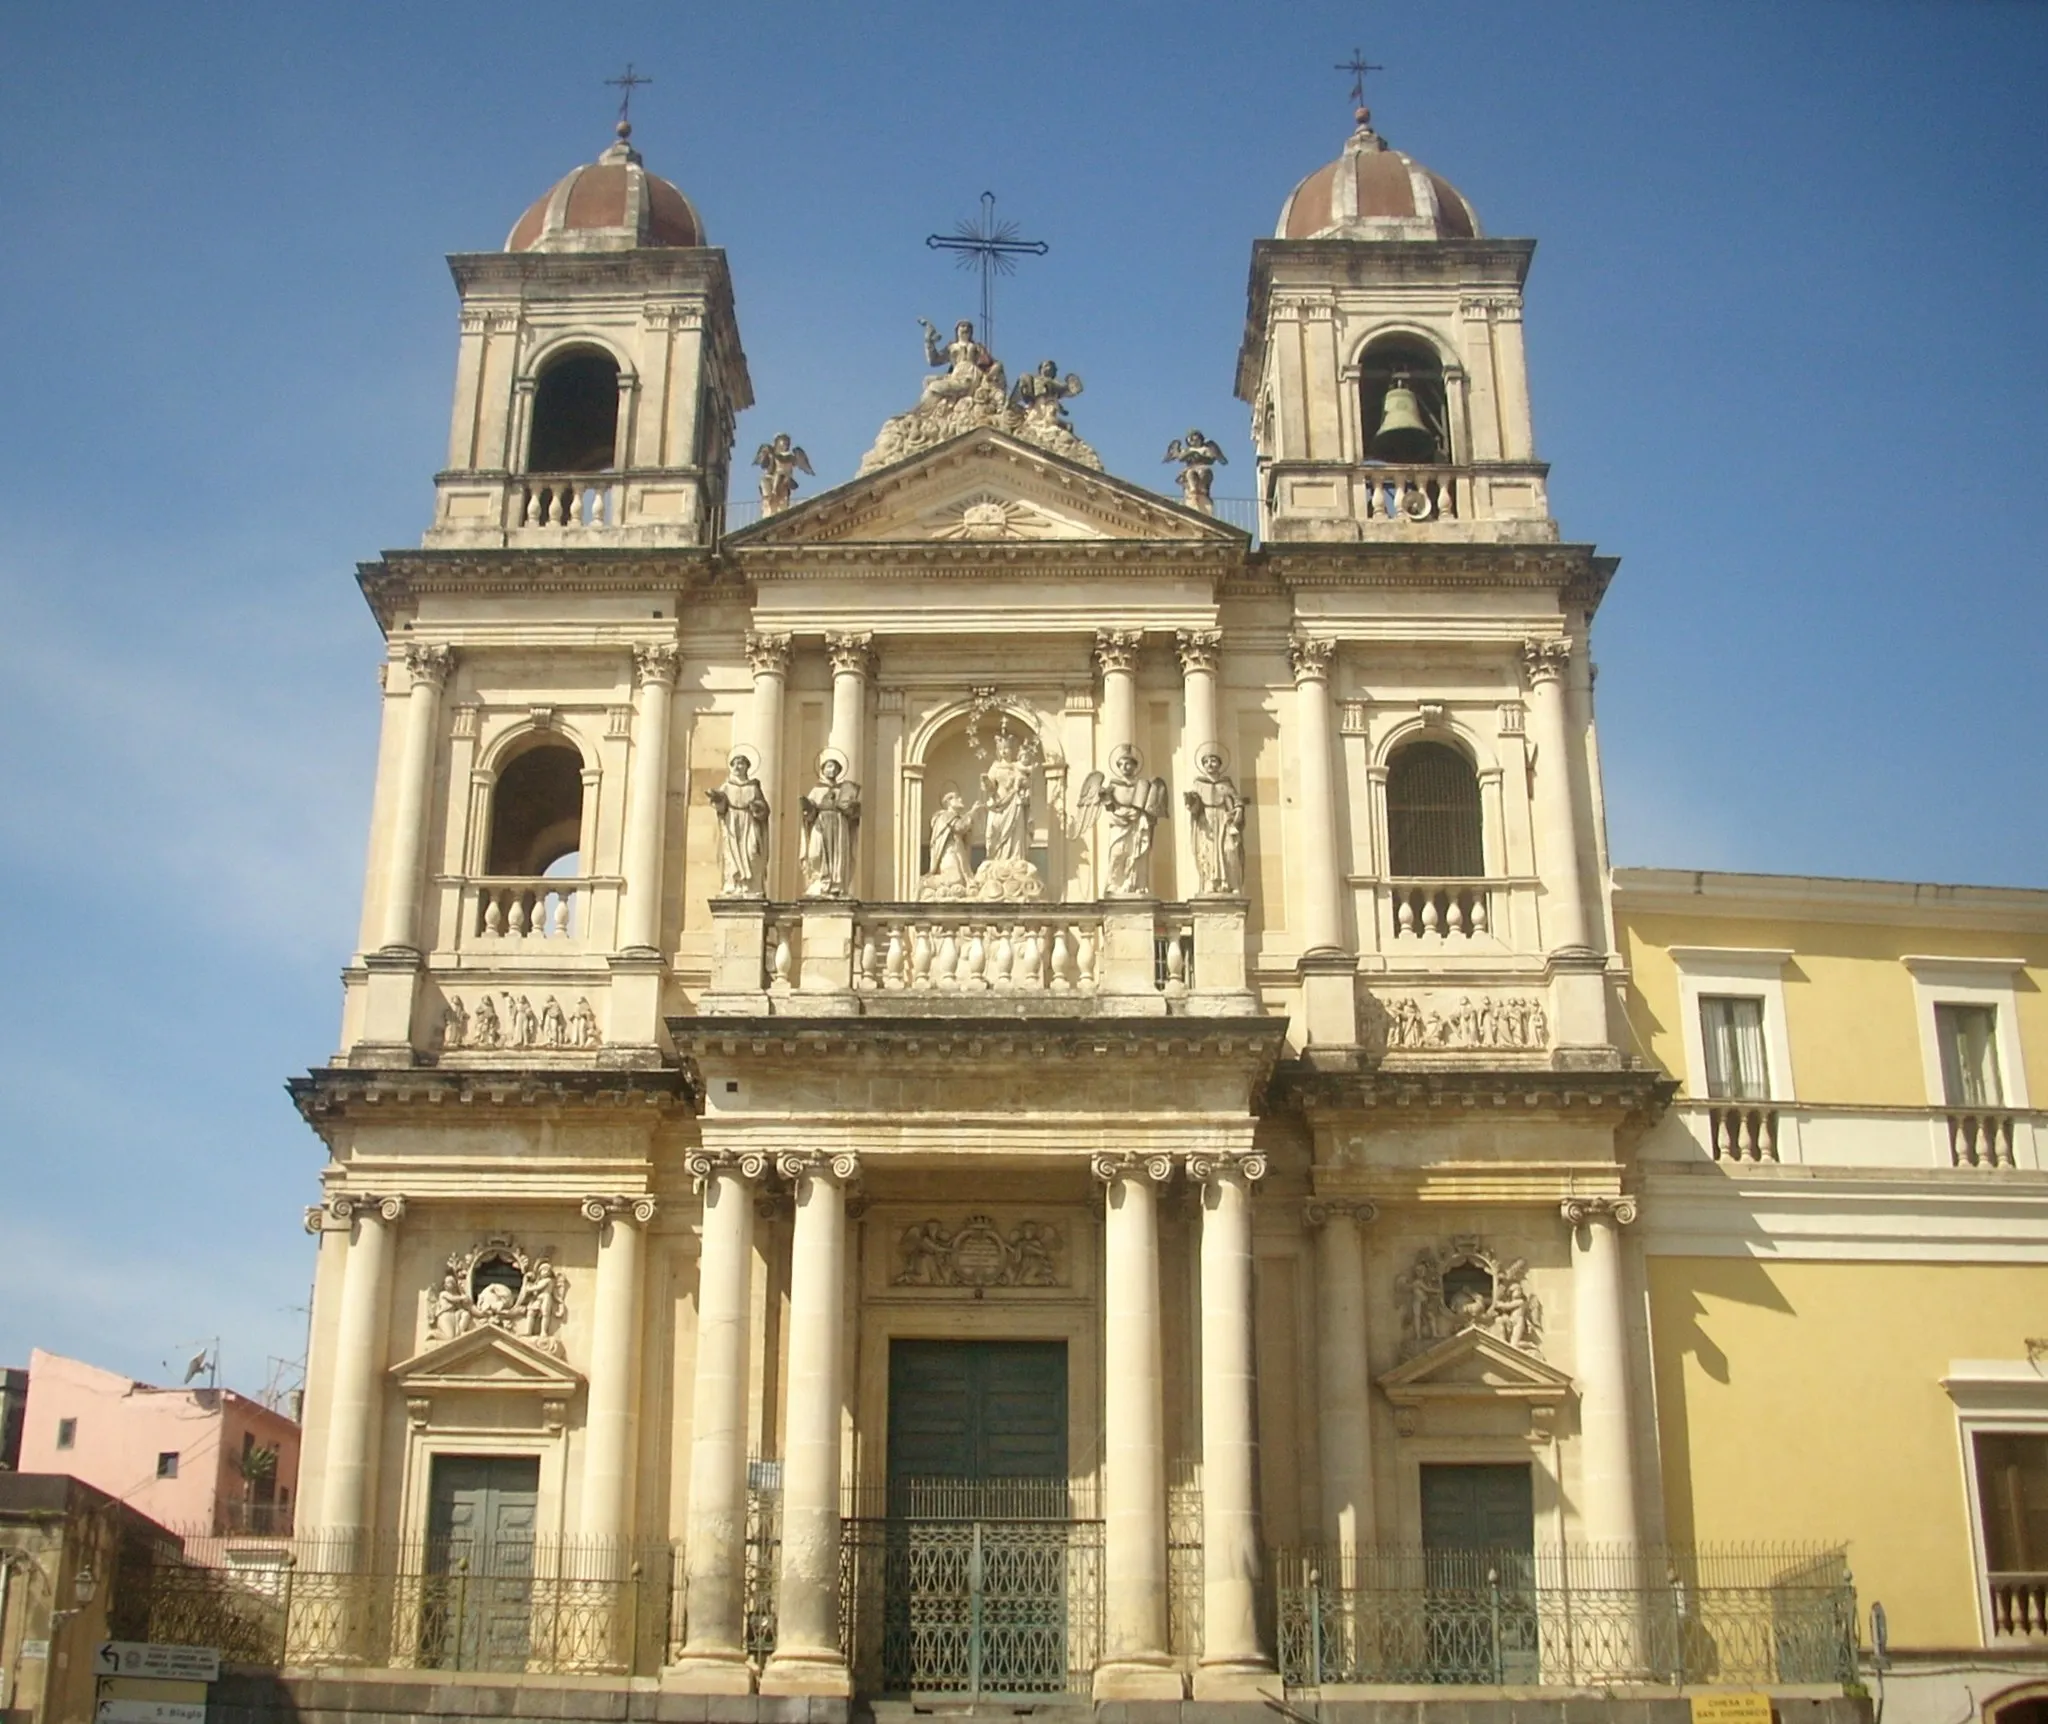 Photo showing: San Domenico Church, piazza San Domeinico, Acireale, Sicily. Built between the 16th and 18th centuries in the neoclassical style.